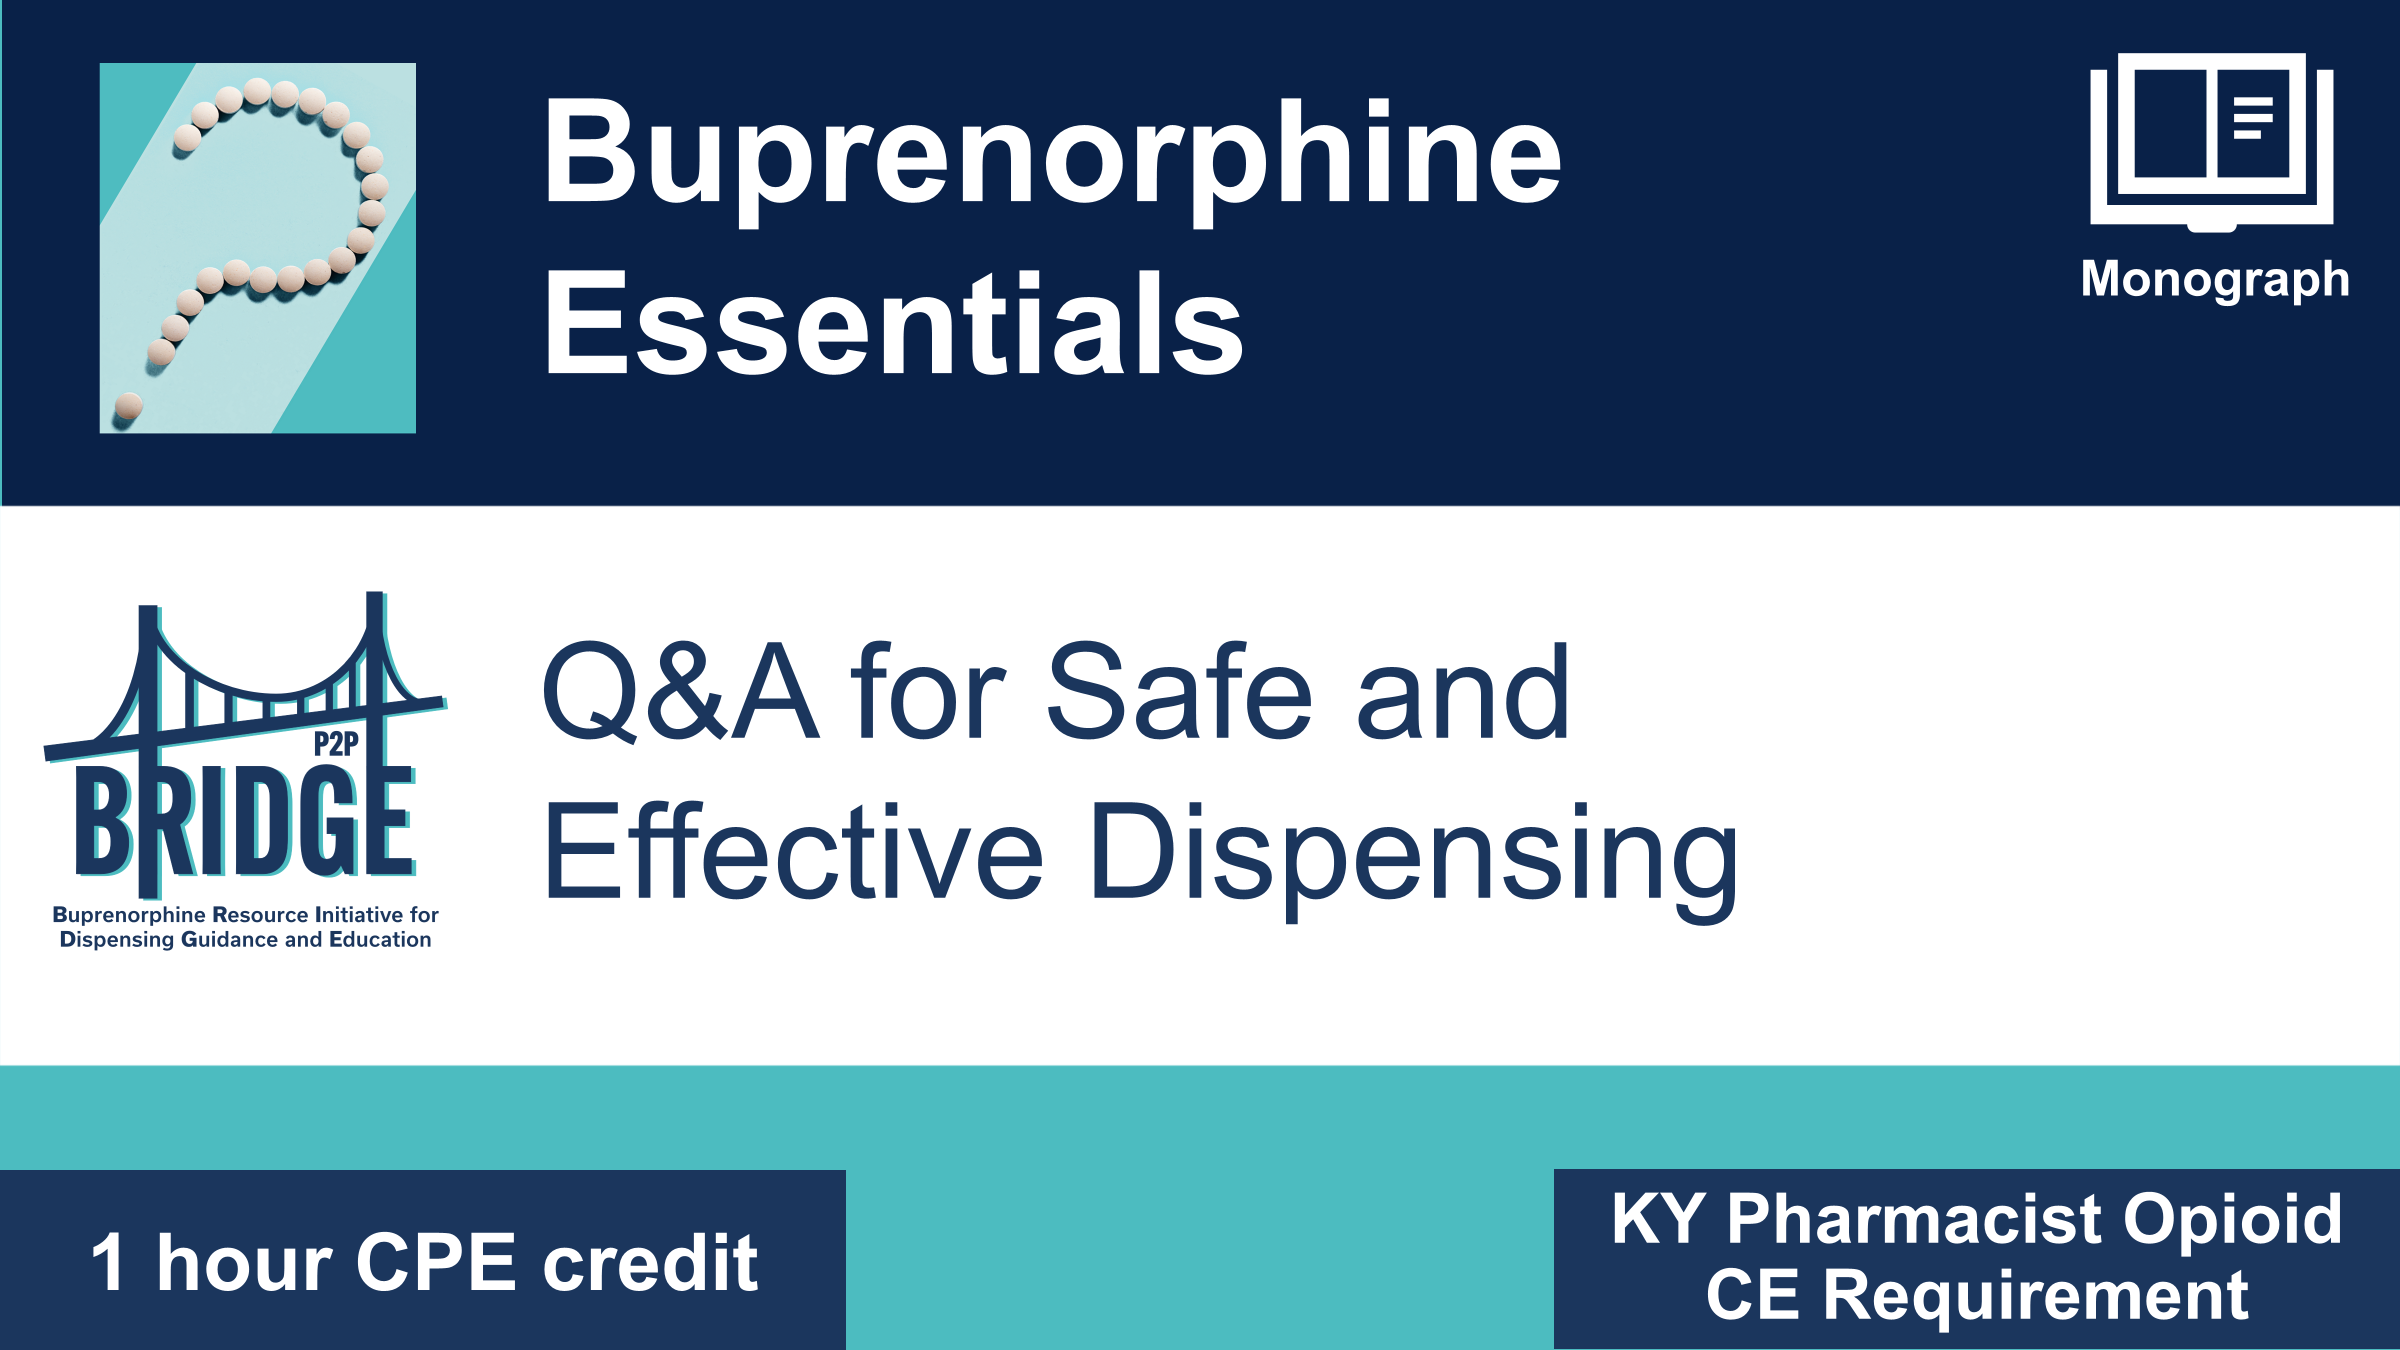 MONOGRAPH | Buprenorphine Essentials: Q&A for Safe and Effective Dispensing